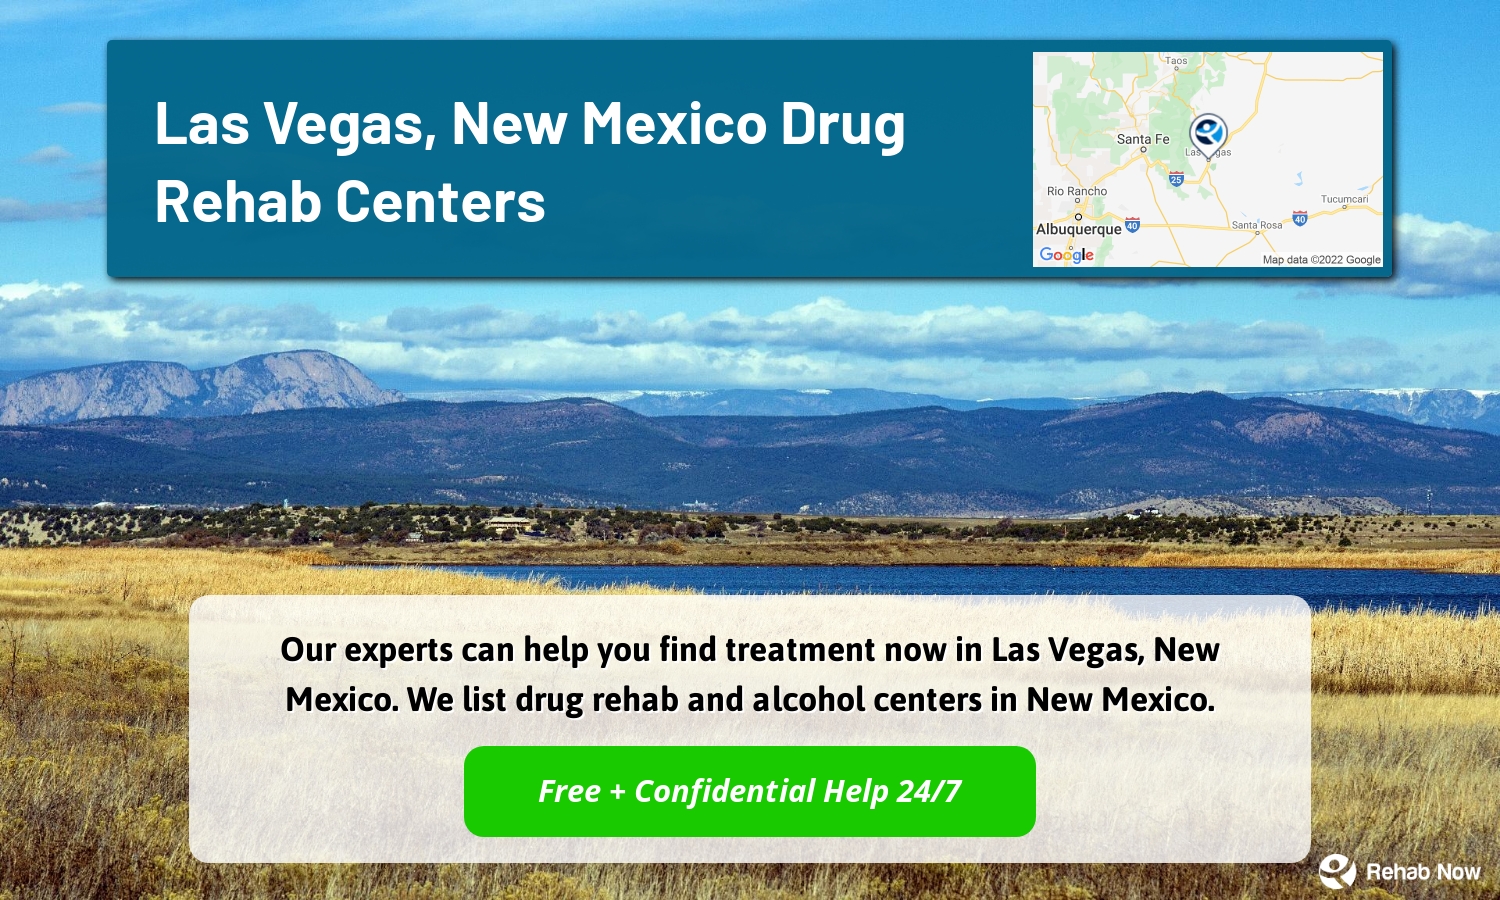 Our experts can help you find treatment now in Las Vegas, New Mexico. We list drug rehab and alcohol centers in New Mexico.